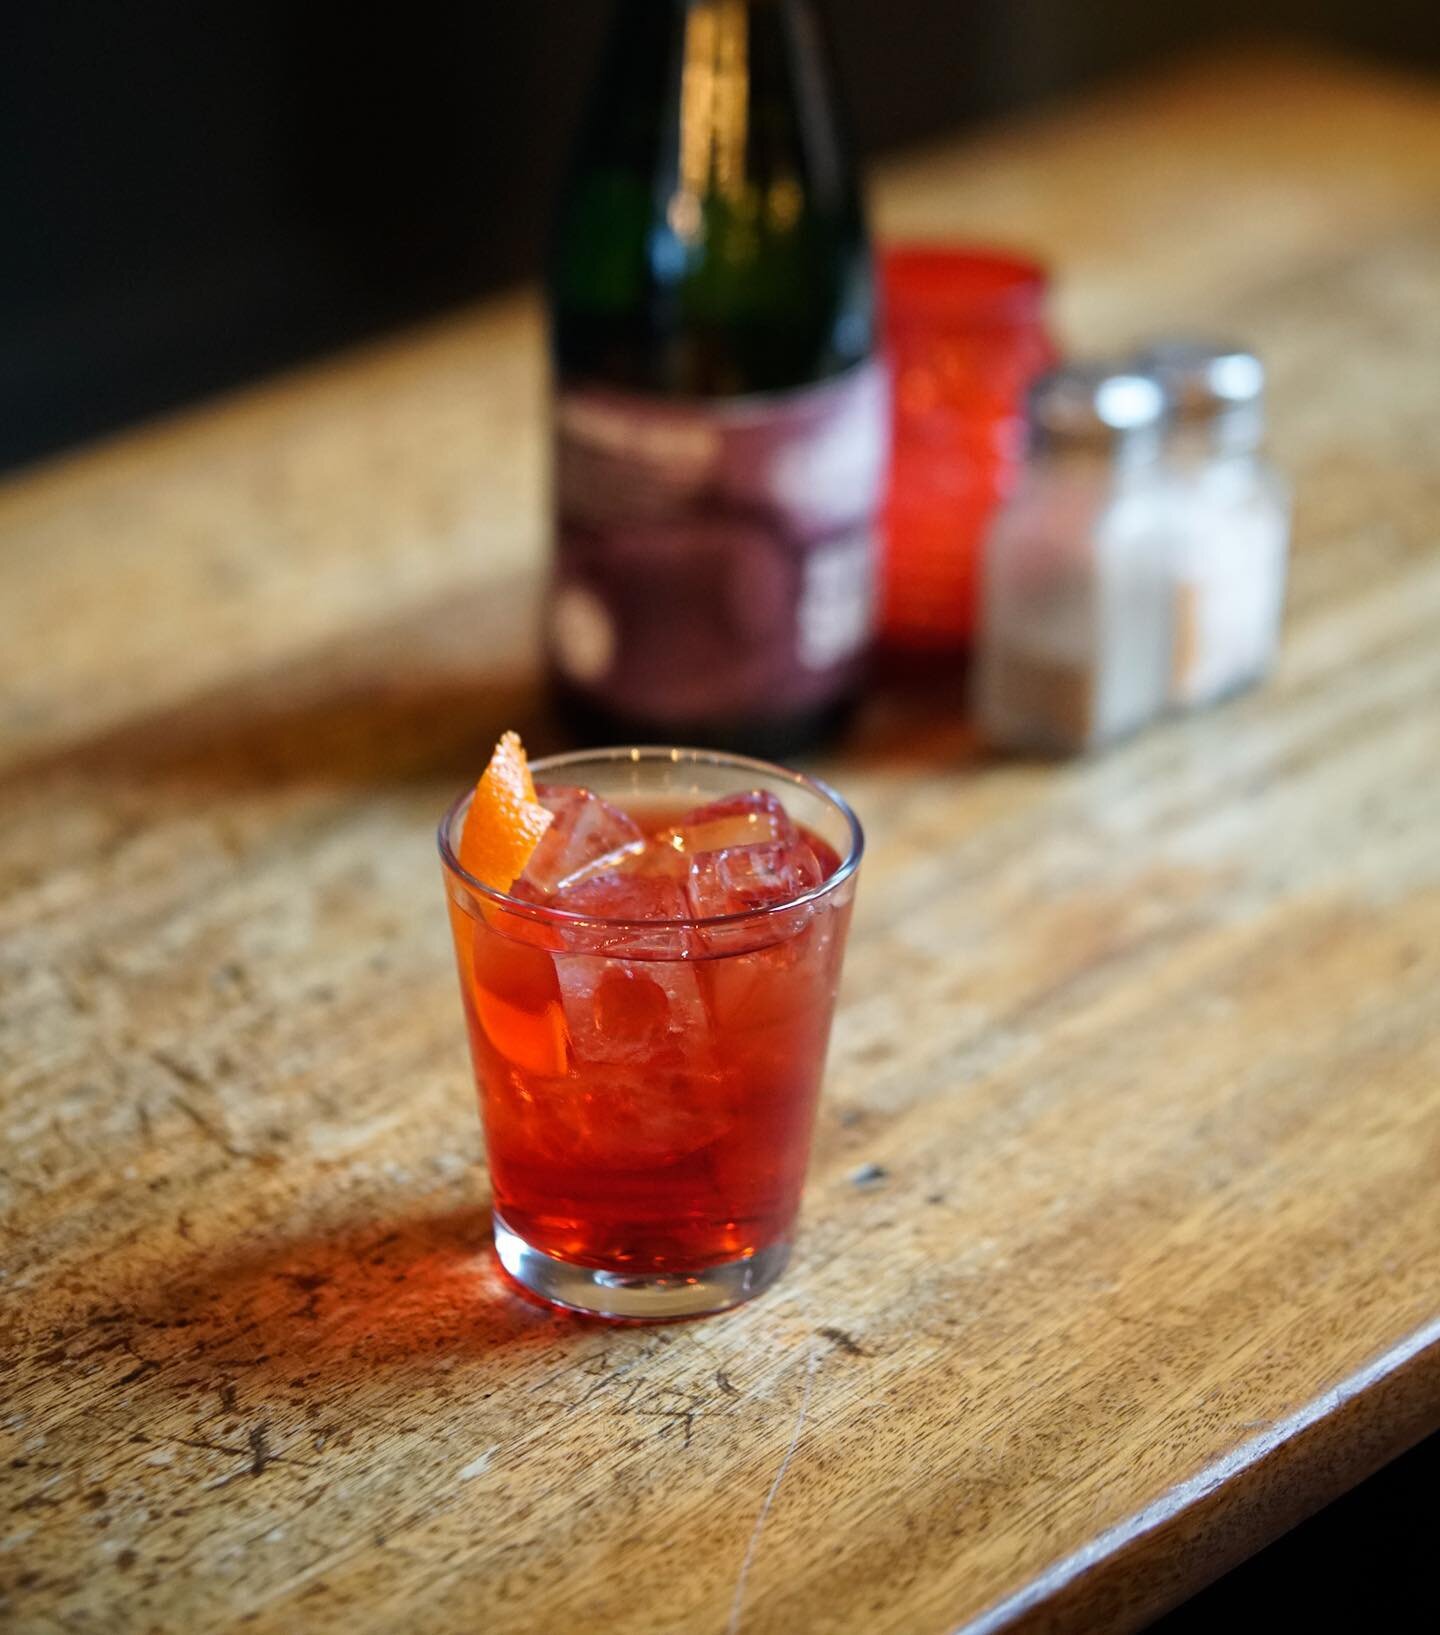 We&rsquo;re always shouting about our beer selection (which is kept up to scratch)&hellip; 

Using the finest gin from our friends at  @eastlondonliquorcompany, we&rsquo;ve got the perfect foundation for our Negroni.

#negroni #angel #islington #craf